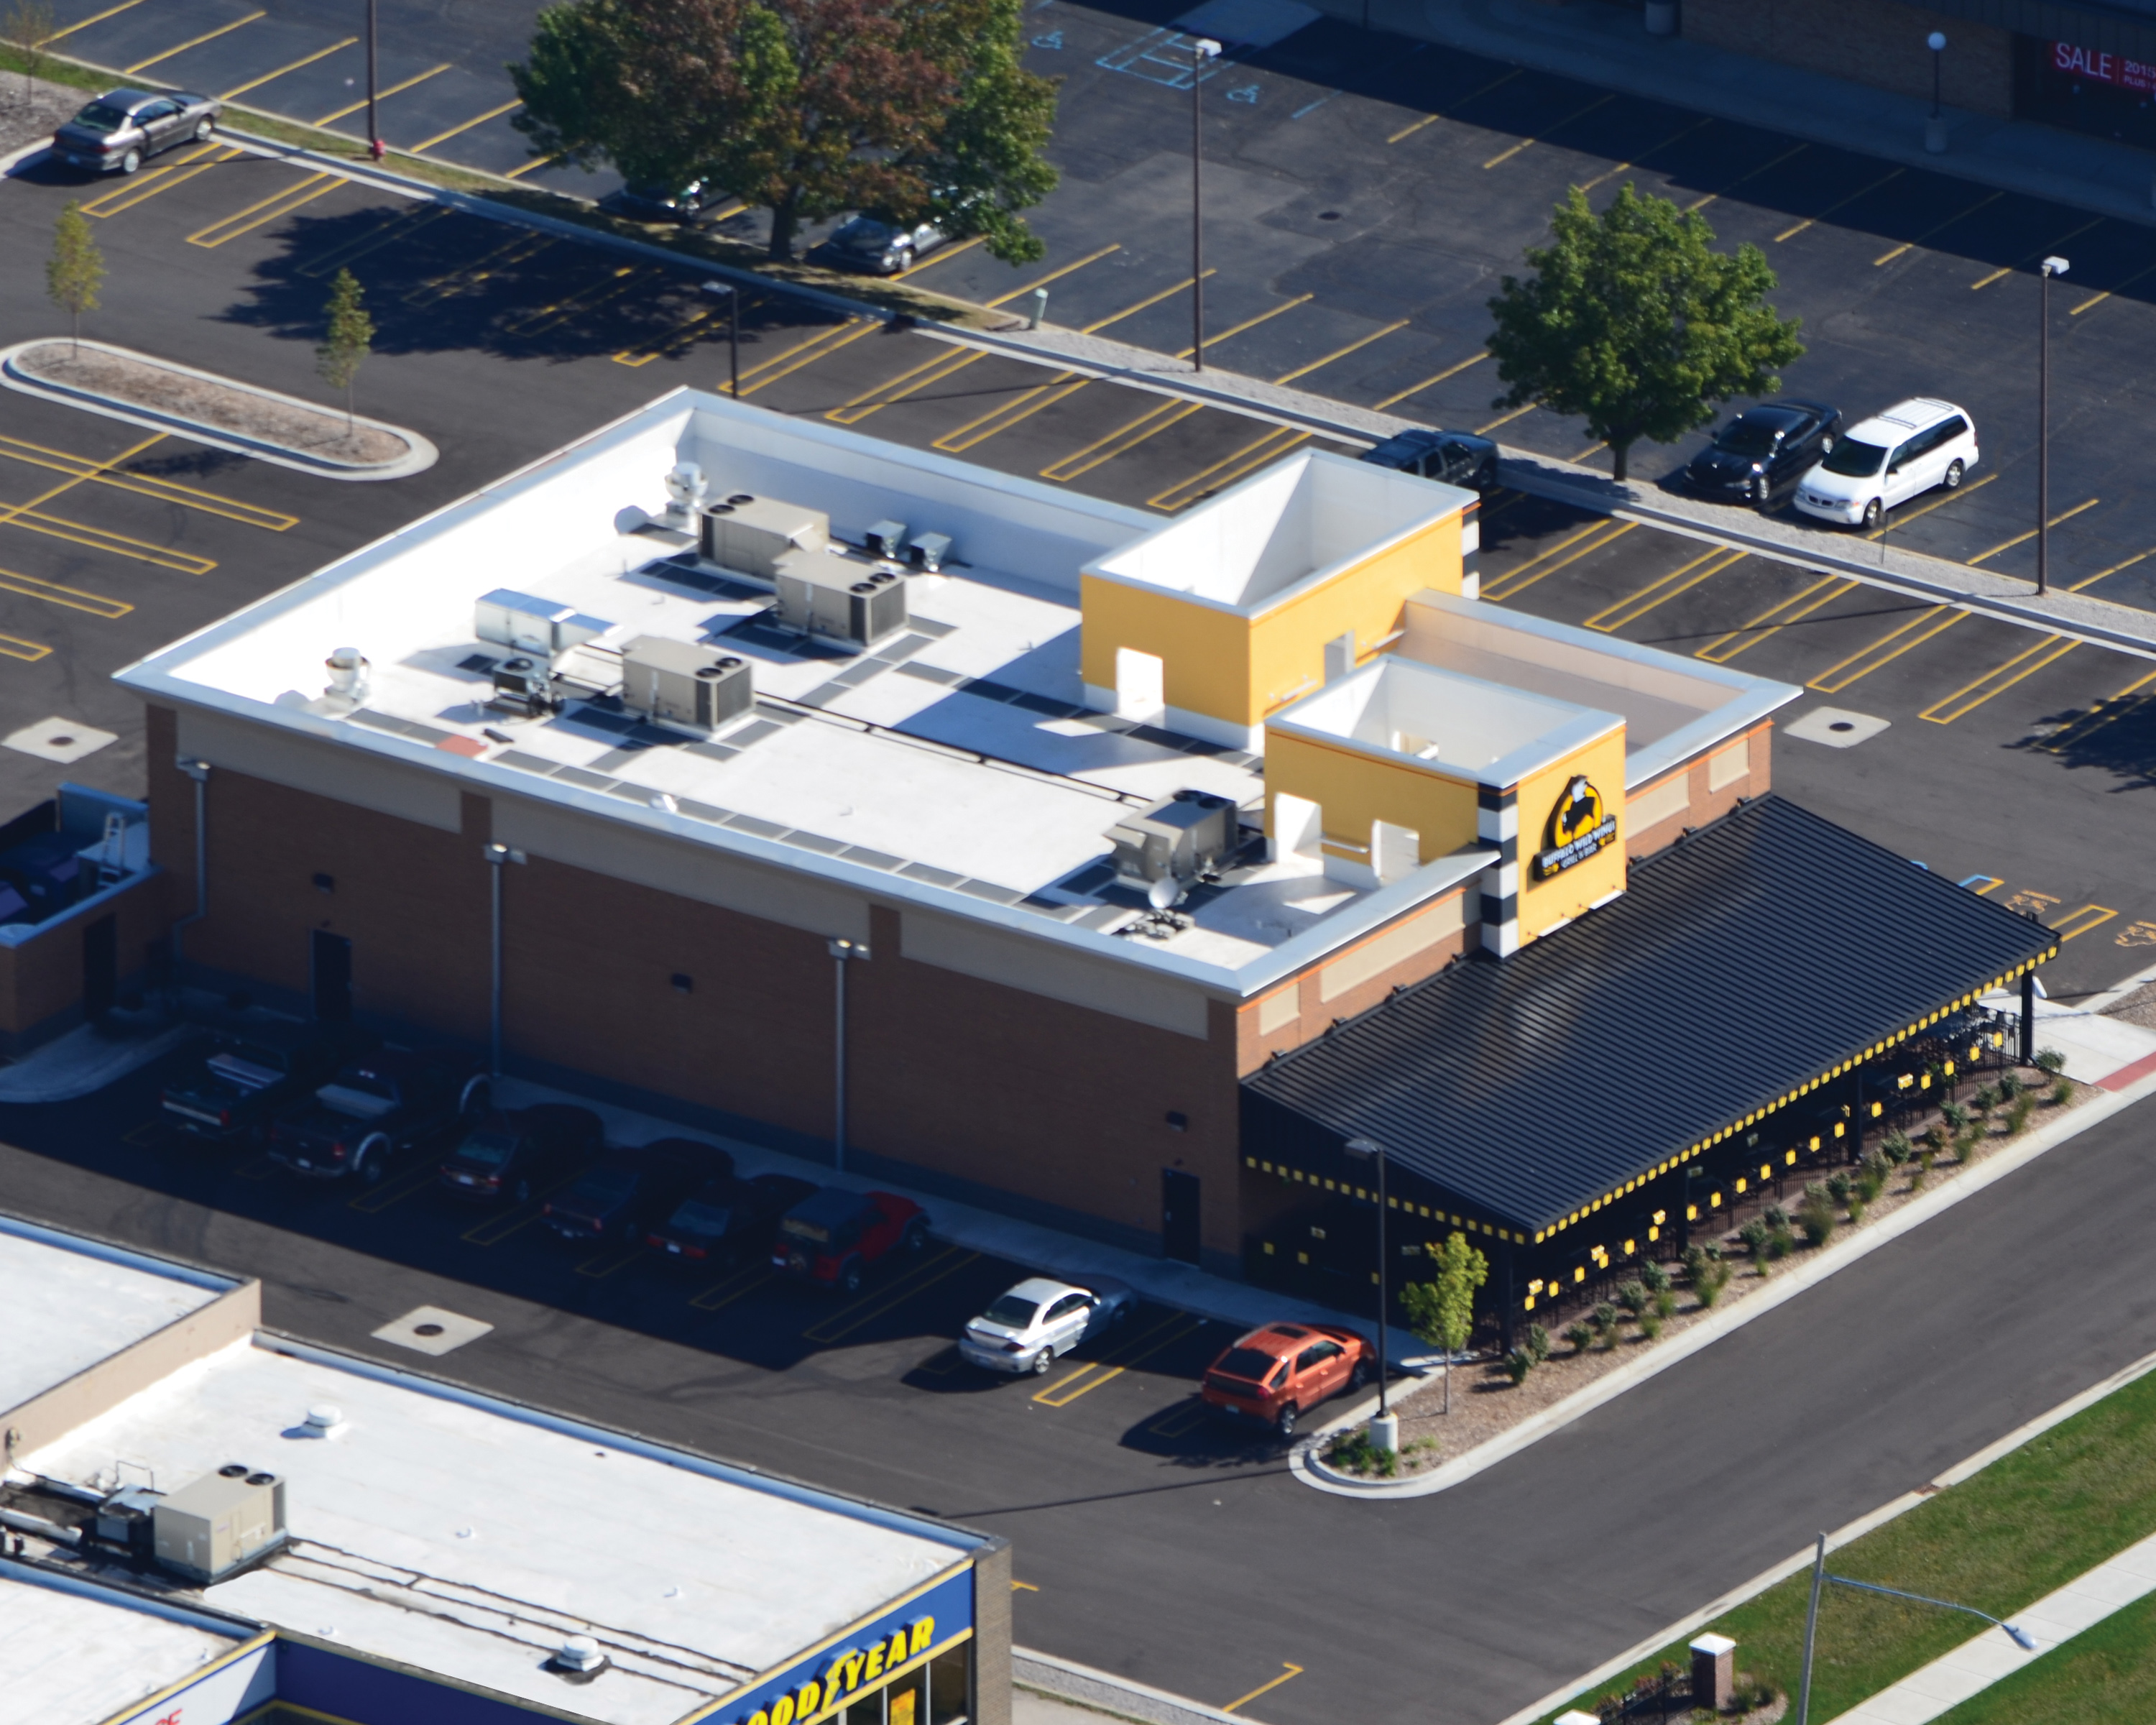 Buffalo Wild Wings restaurant in Saginaw, Michigan used sustainable and energy efficient duro-last products